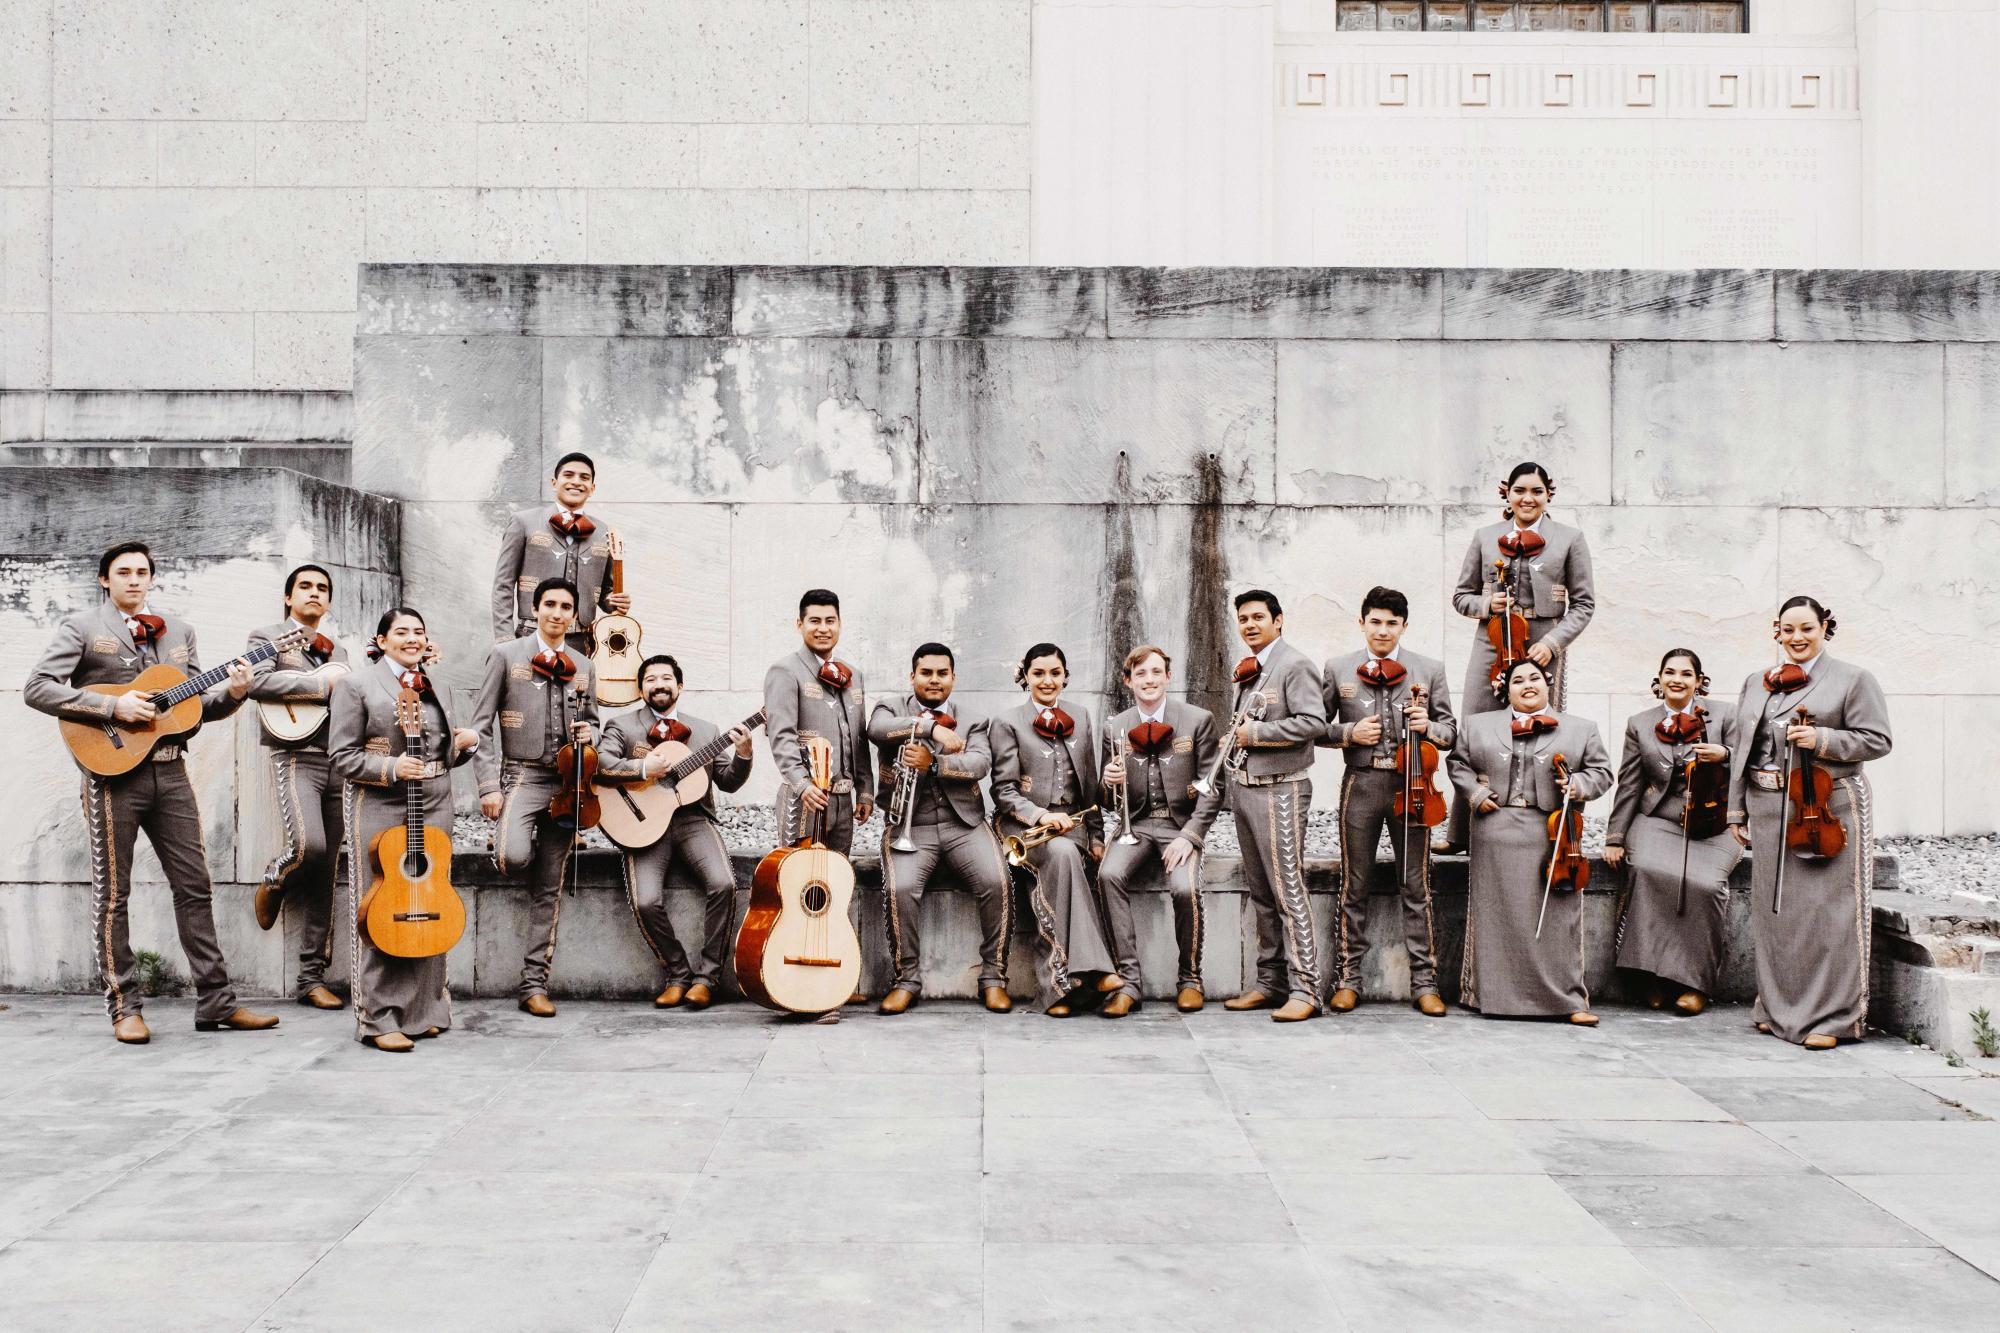 Students in the mariachi ensemble pose with their instruments